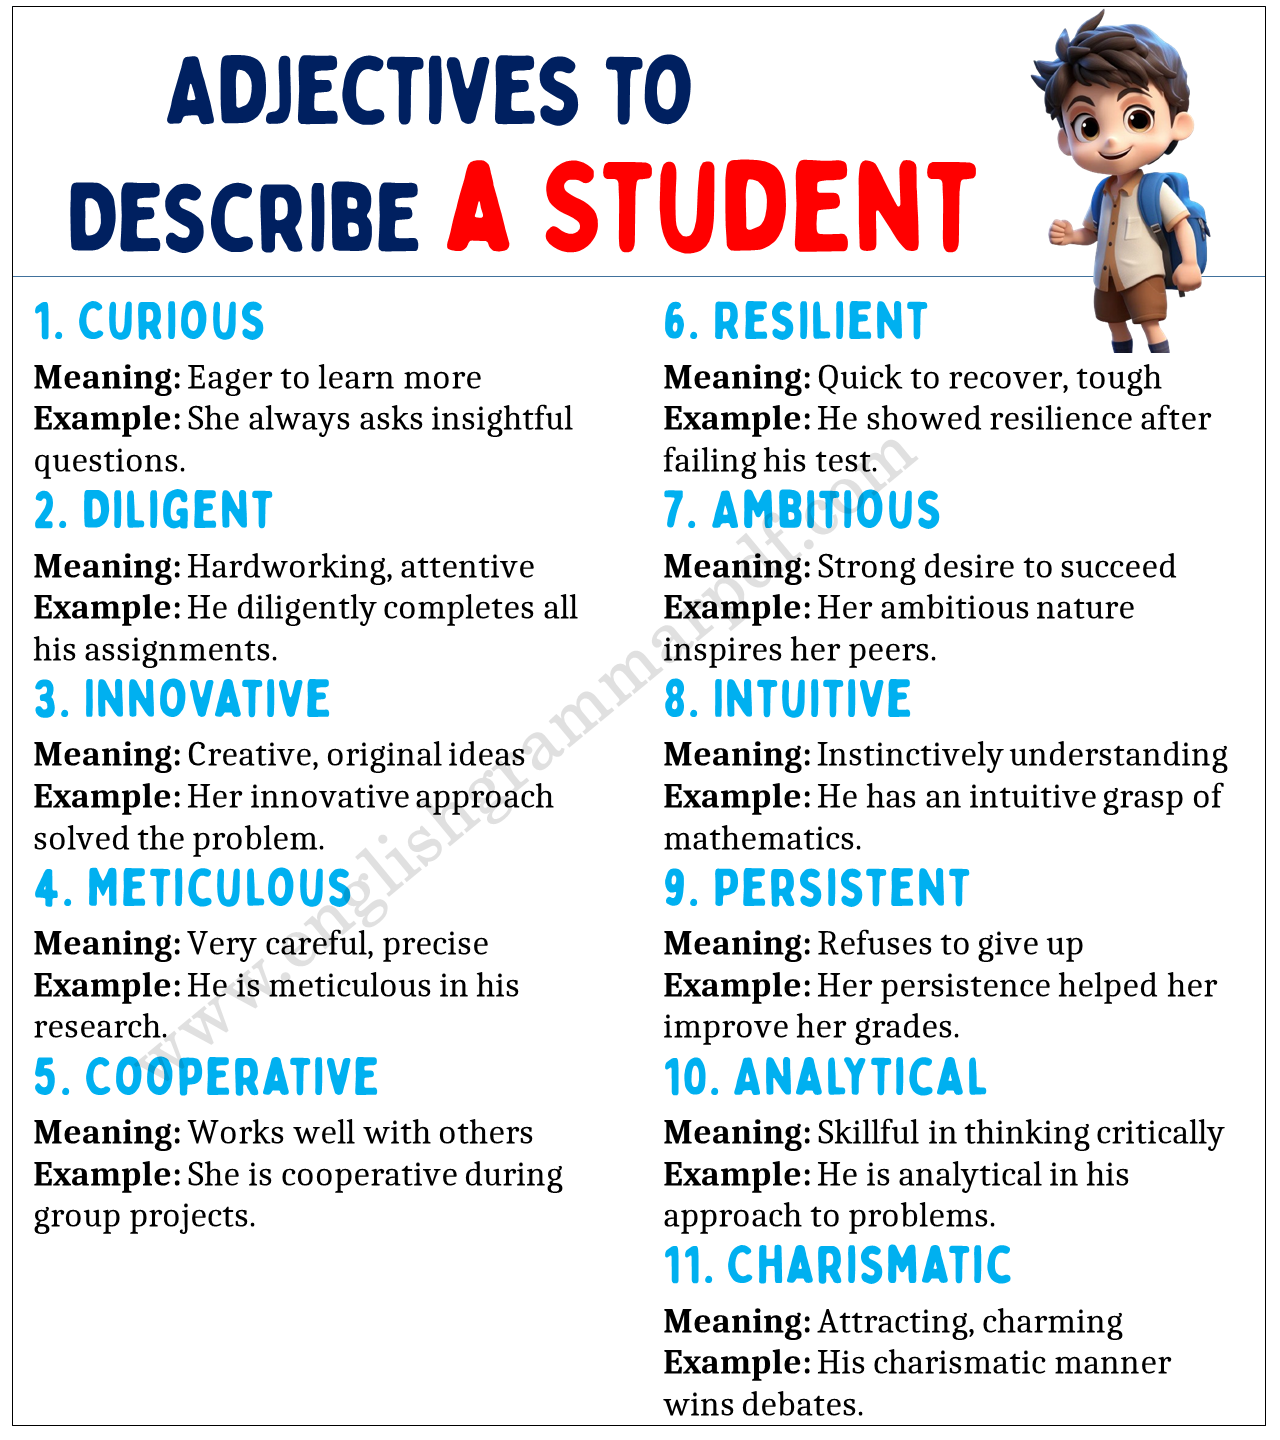 Adjectives to Describe a Student